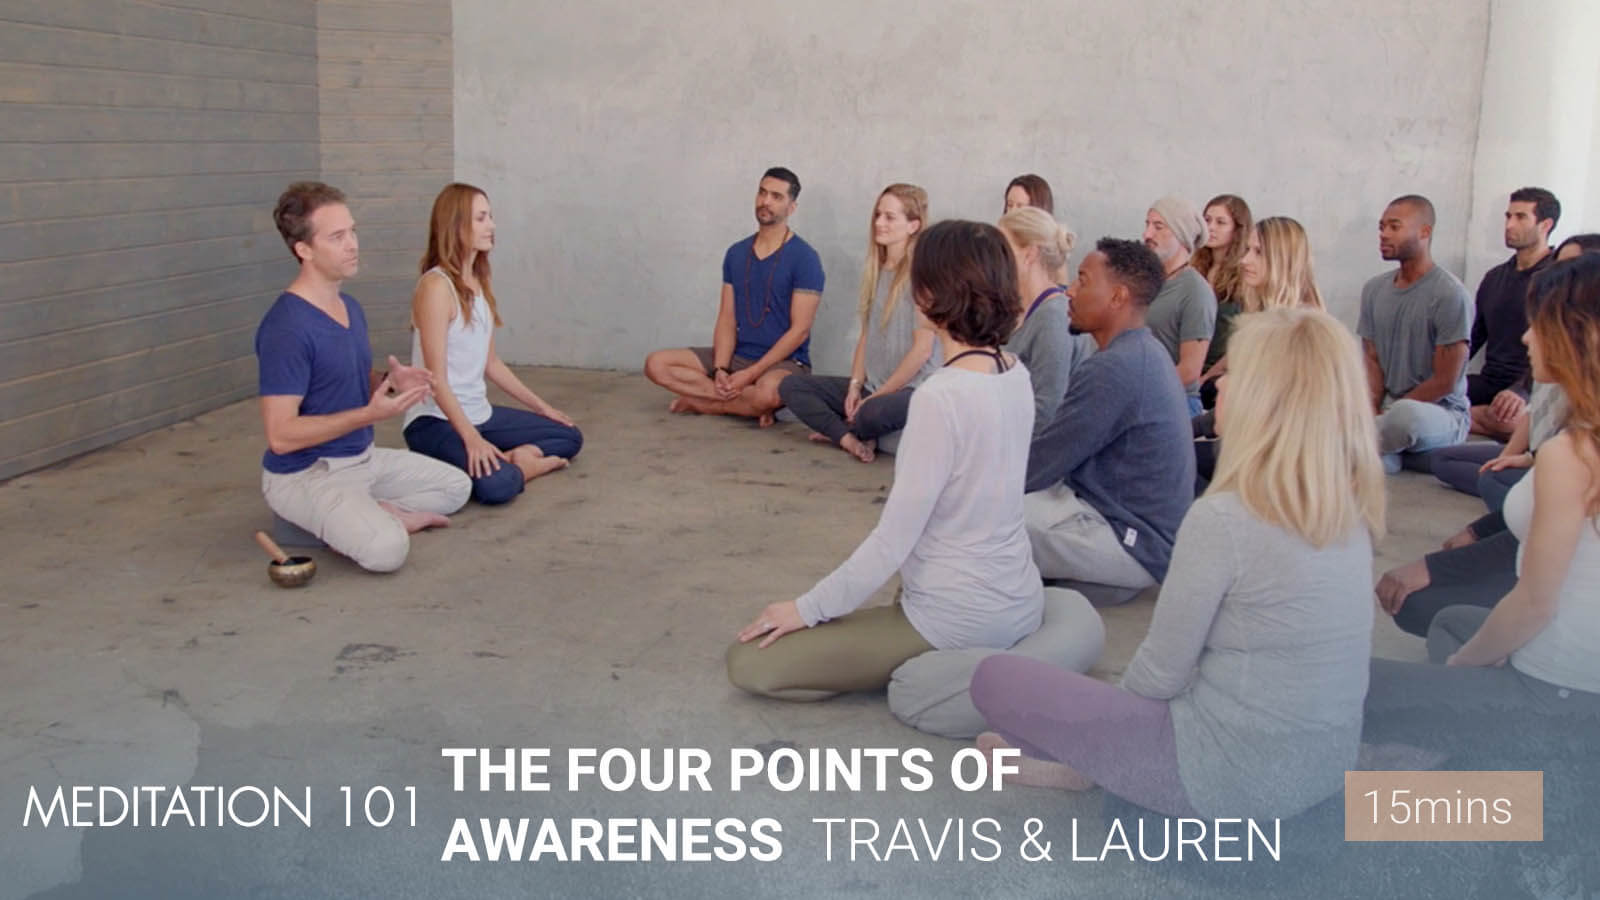 .The <b>Four Points</b> of Awareness.